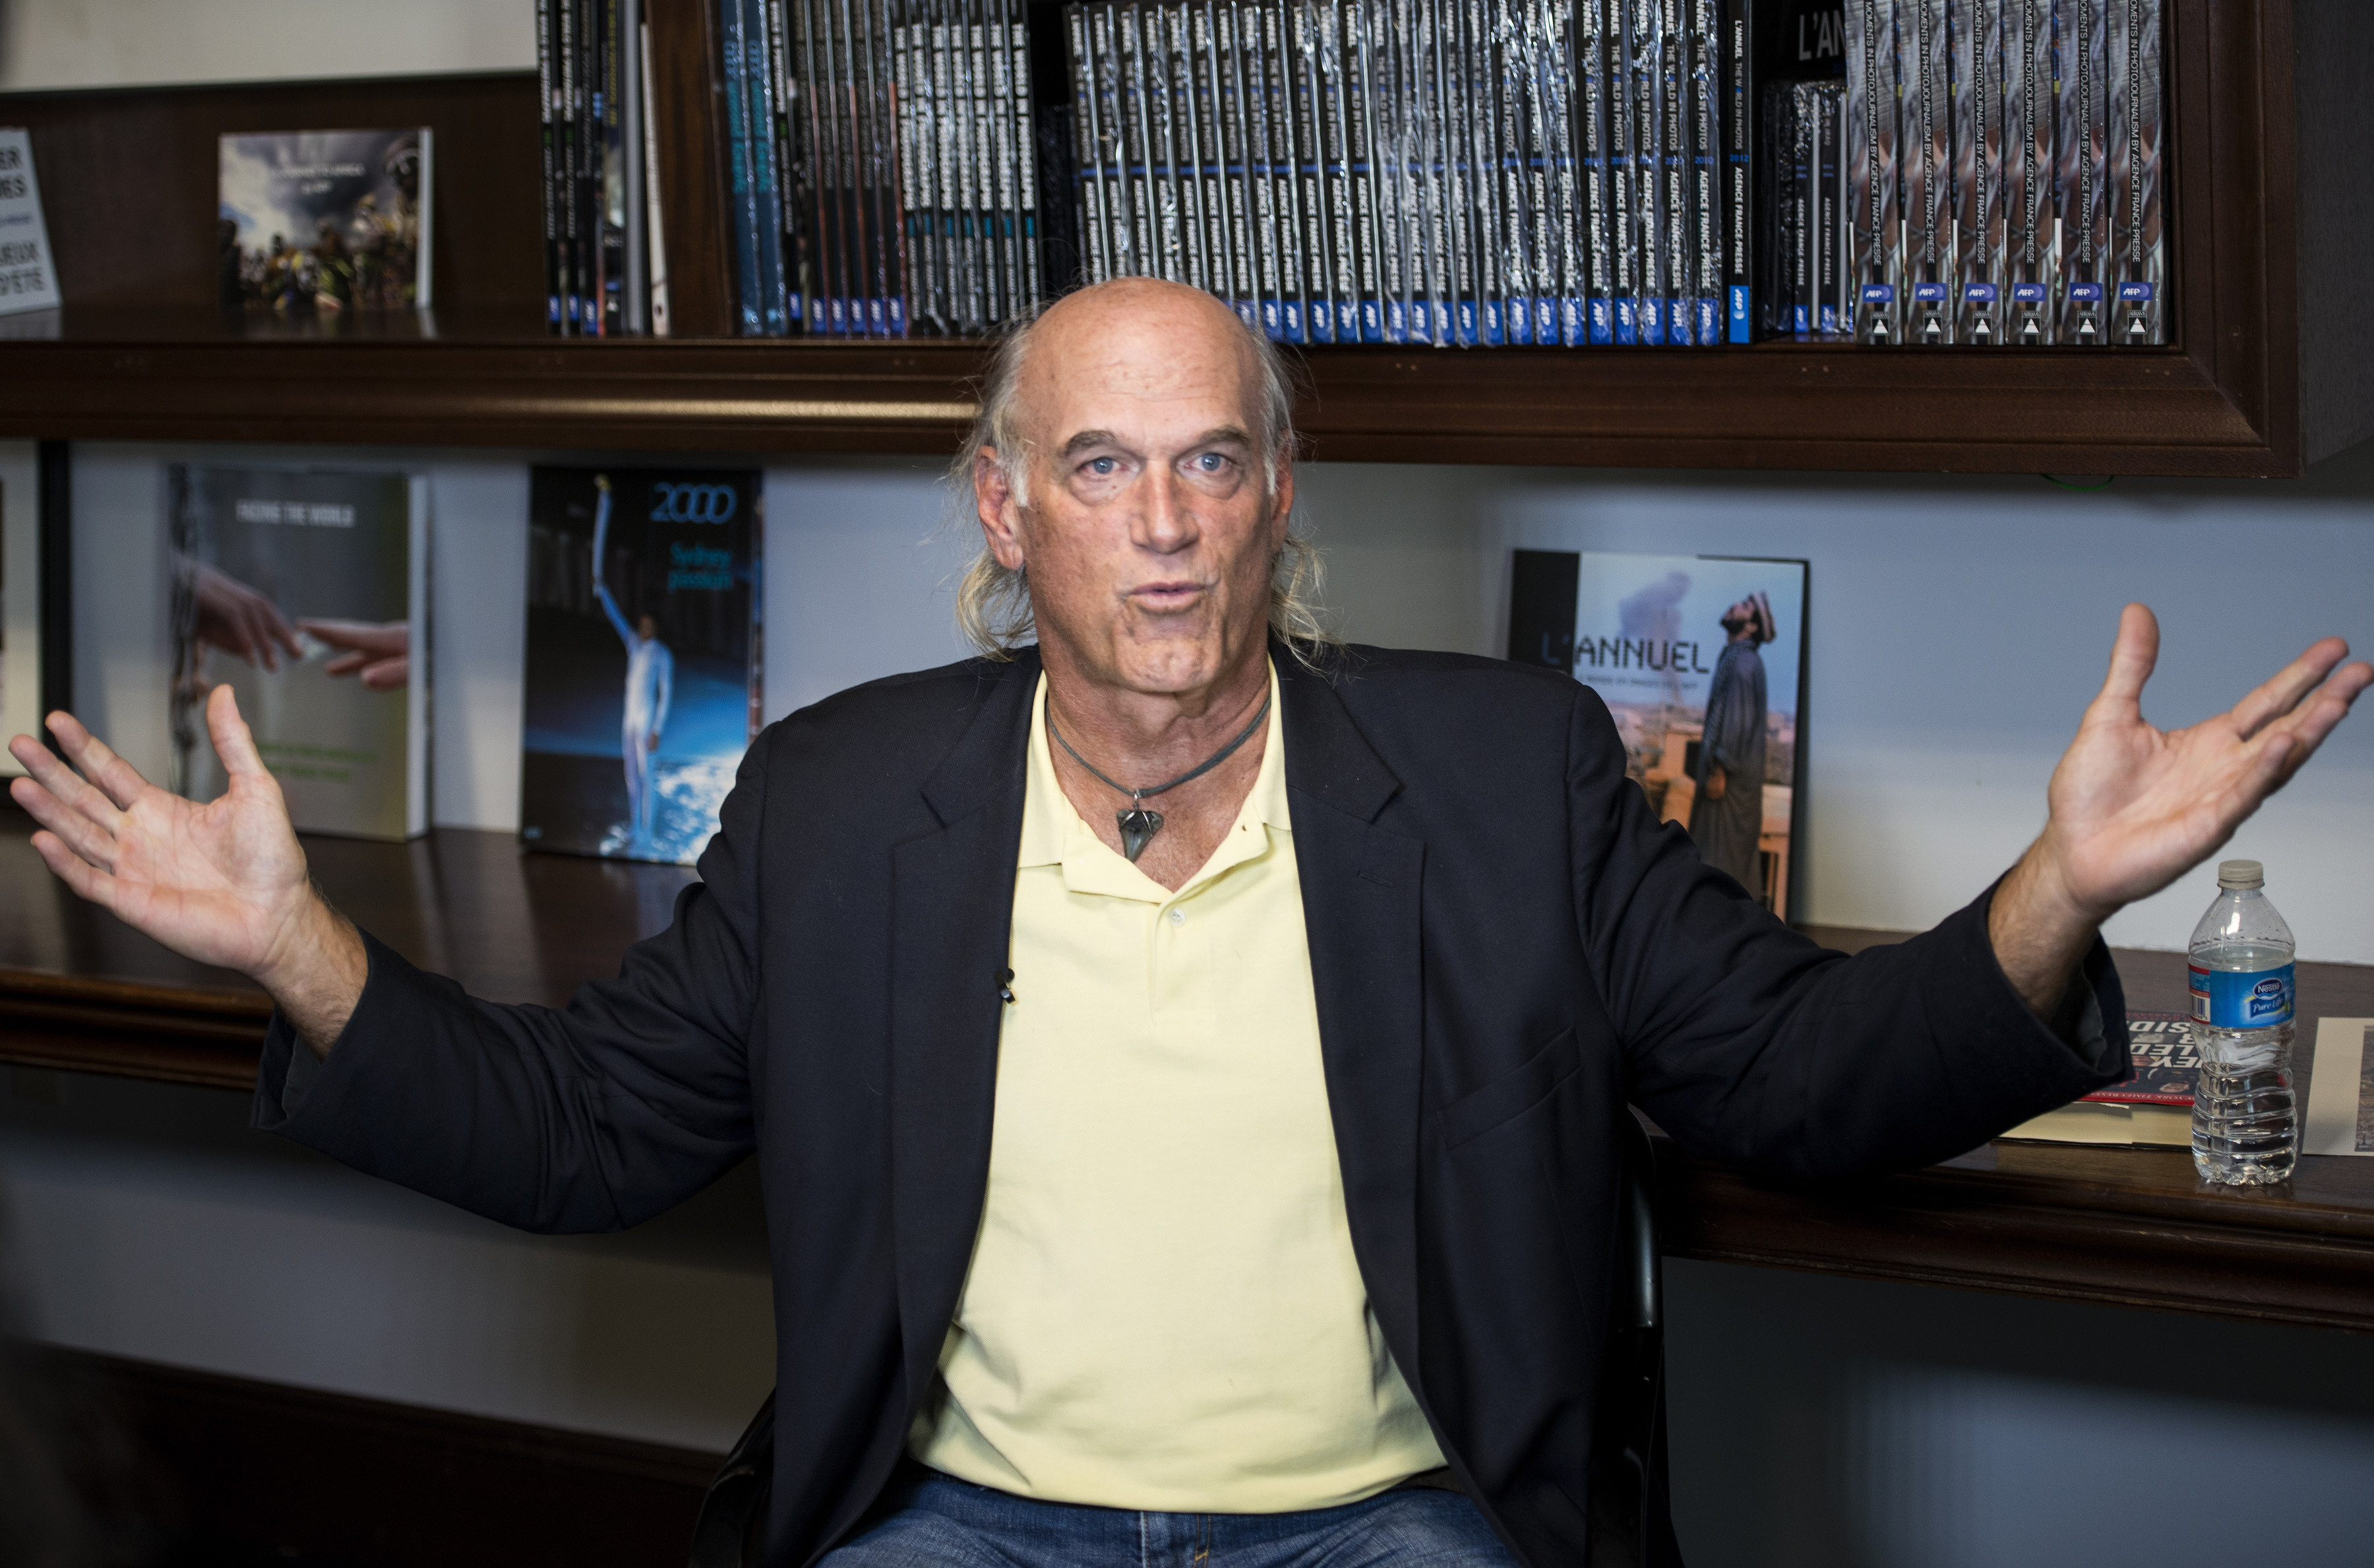 Former pro wrestler Jesse Ventura speaking about his book "They Killed Our President" October 4, 2013 in Washington, DC.  (BRENDAN SMIALOWSKI/AFP/Getty Images)